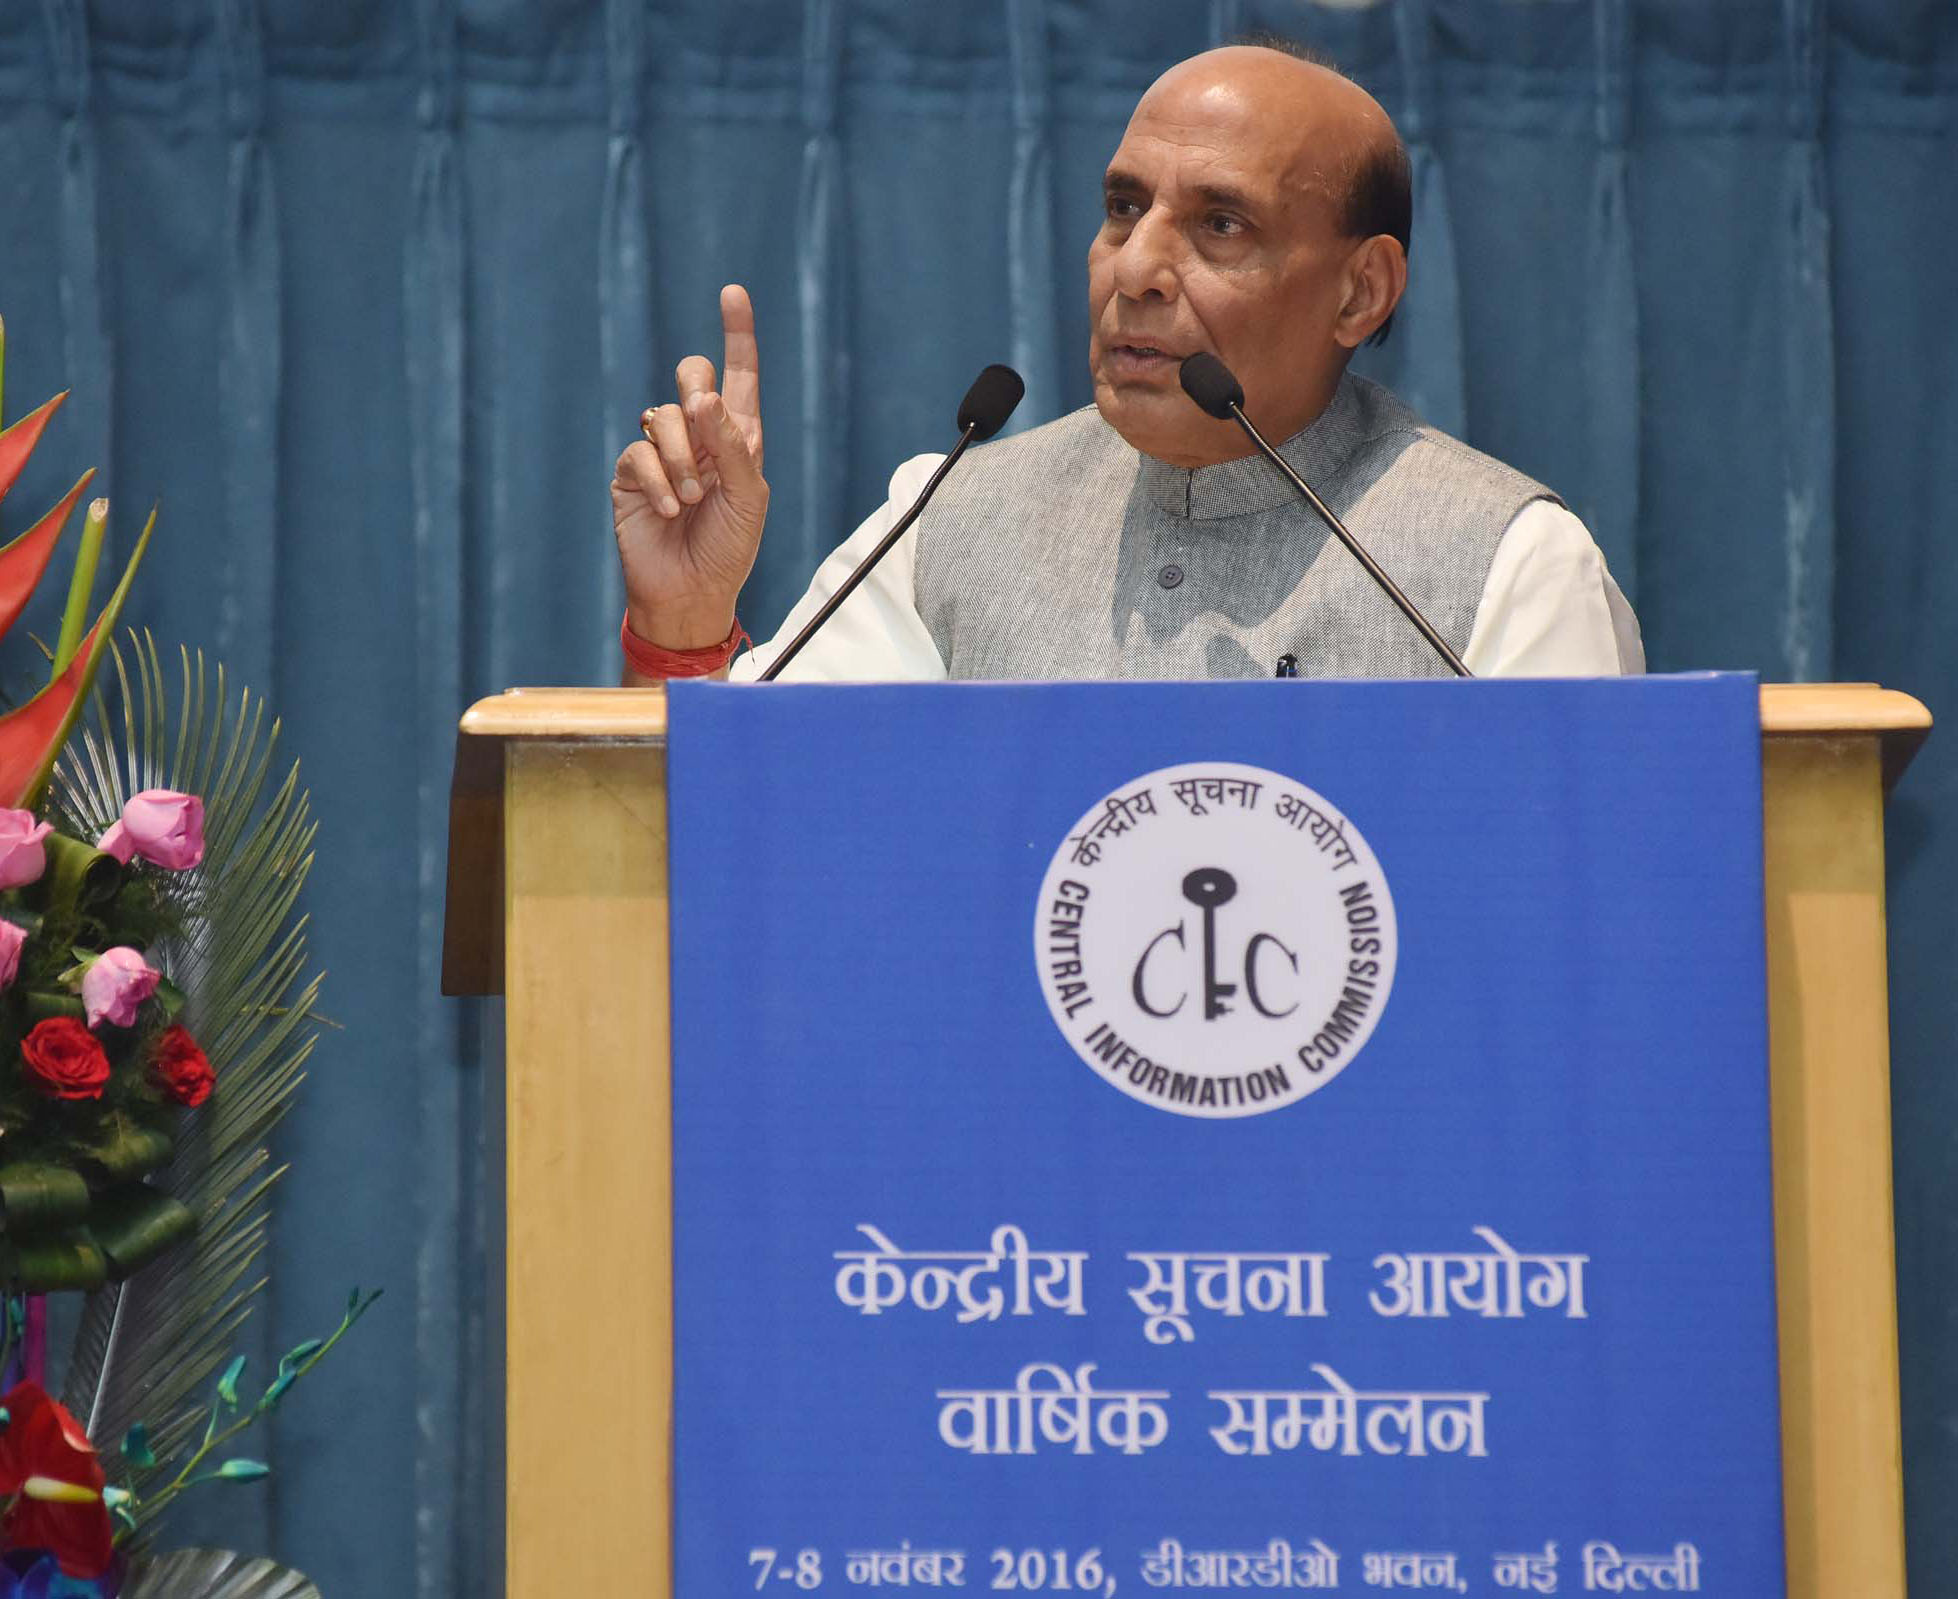 The Union Home Minister, Shri Rajnath Singh delivering the inaugural address at the 11th Annual Convention of Central Information Commission (CIC), in New Delhi on November 07, 2016.